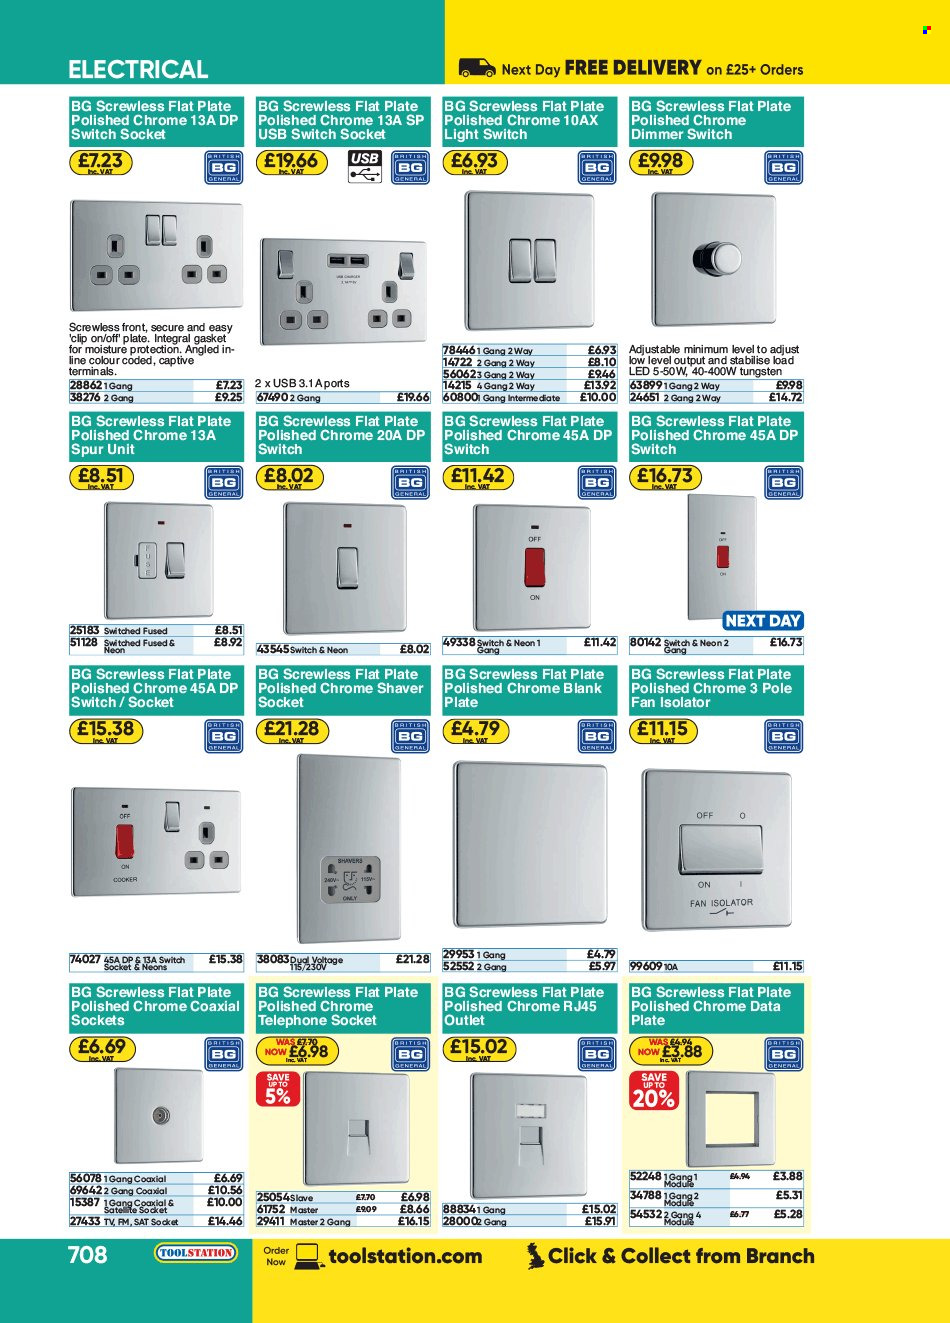 thumbnail - Toolstation offer  - Sales products - switch, socket, fan isolator. Page 708.